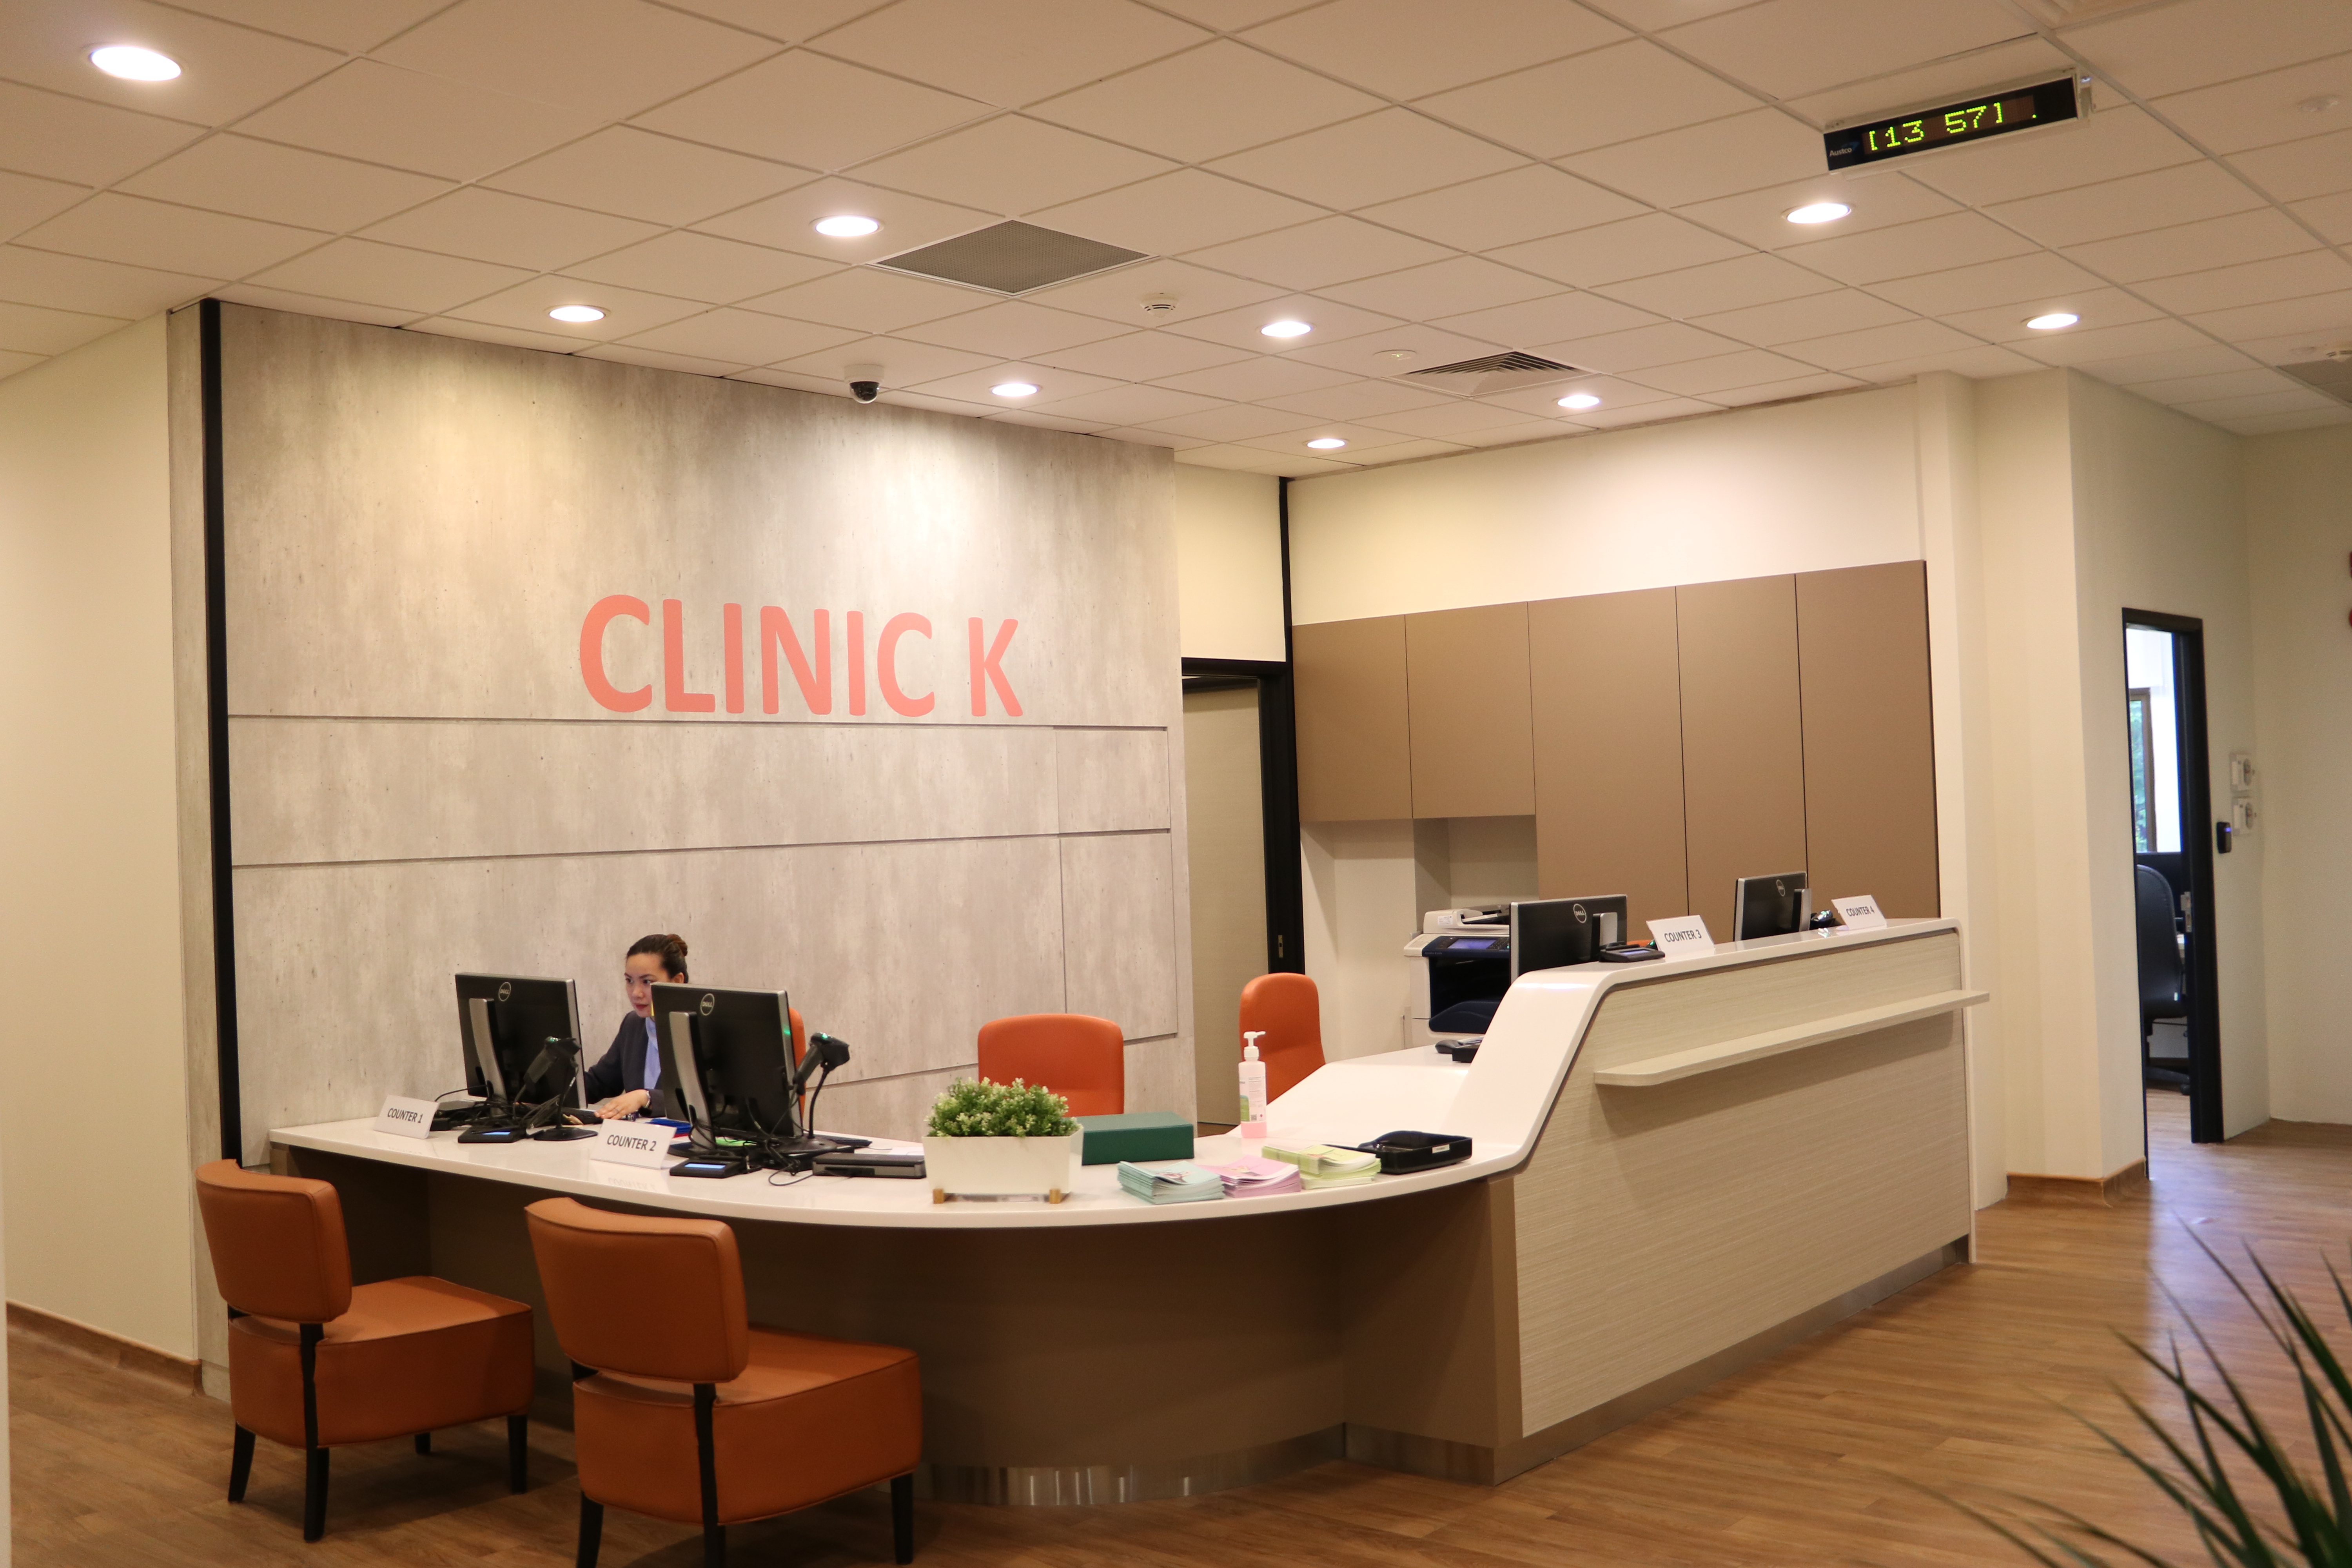 The reception counter of Clinic K.